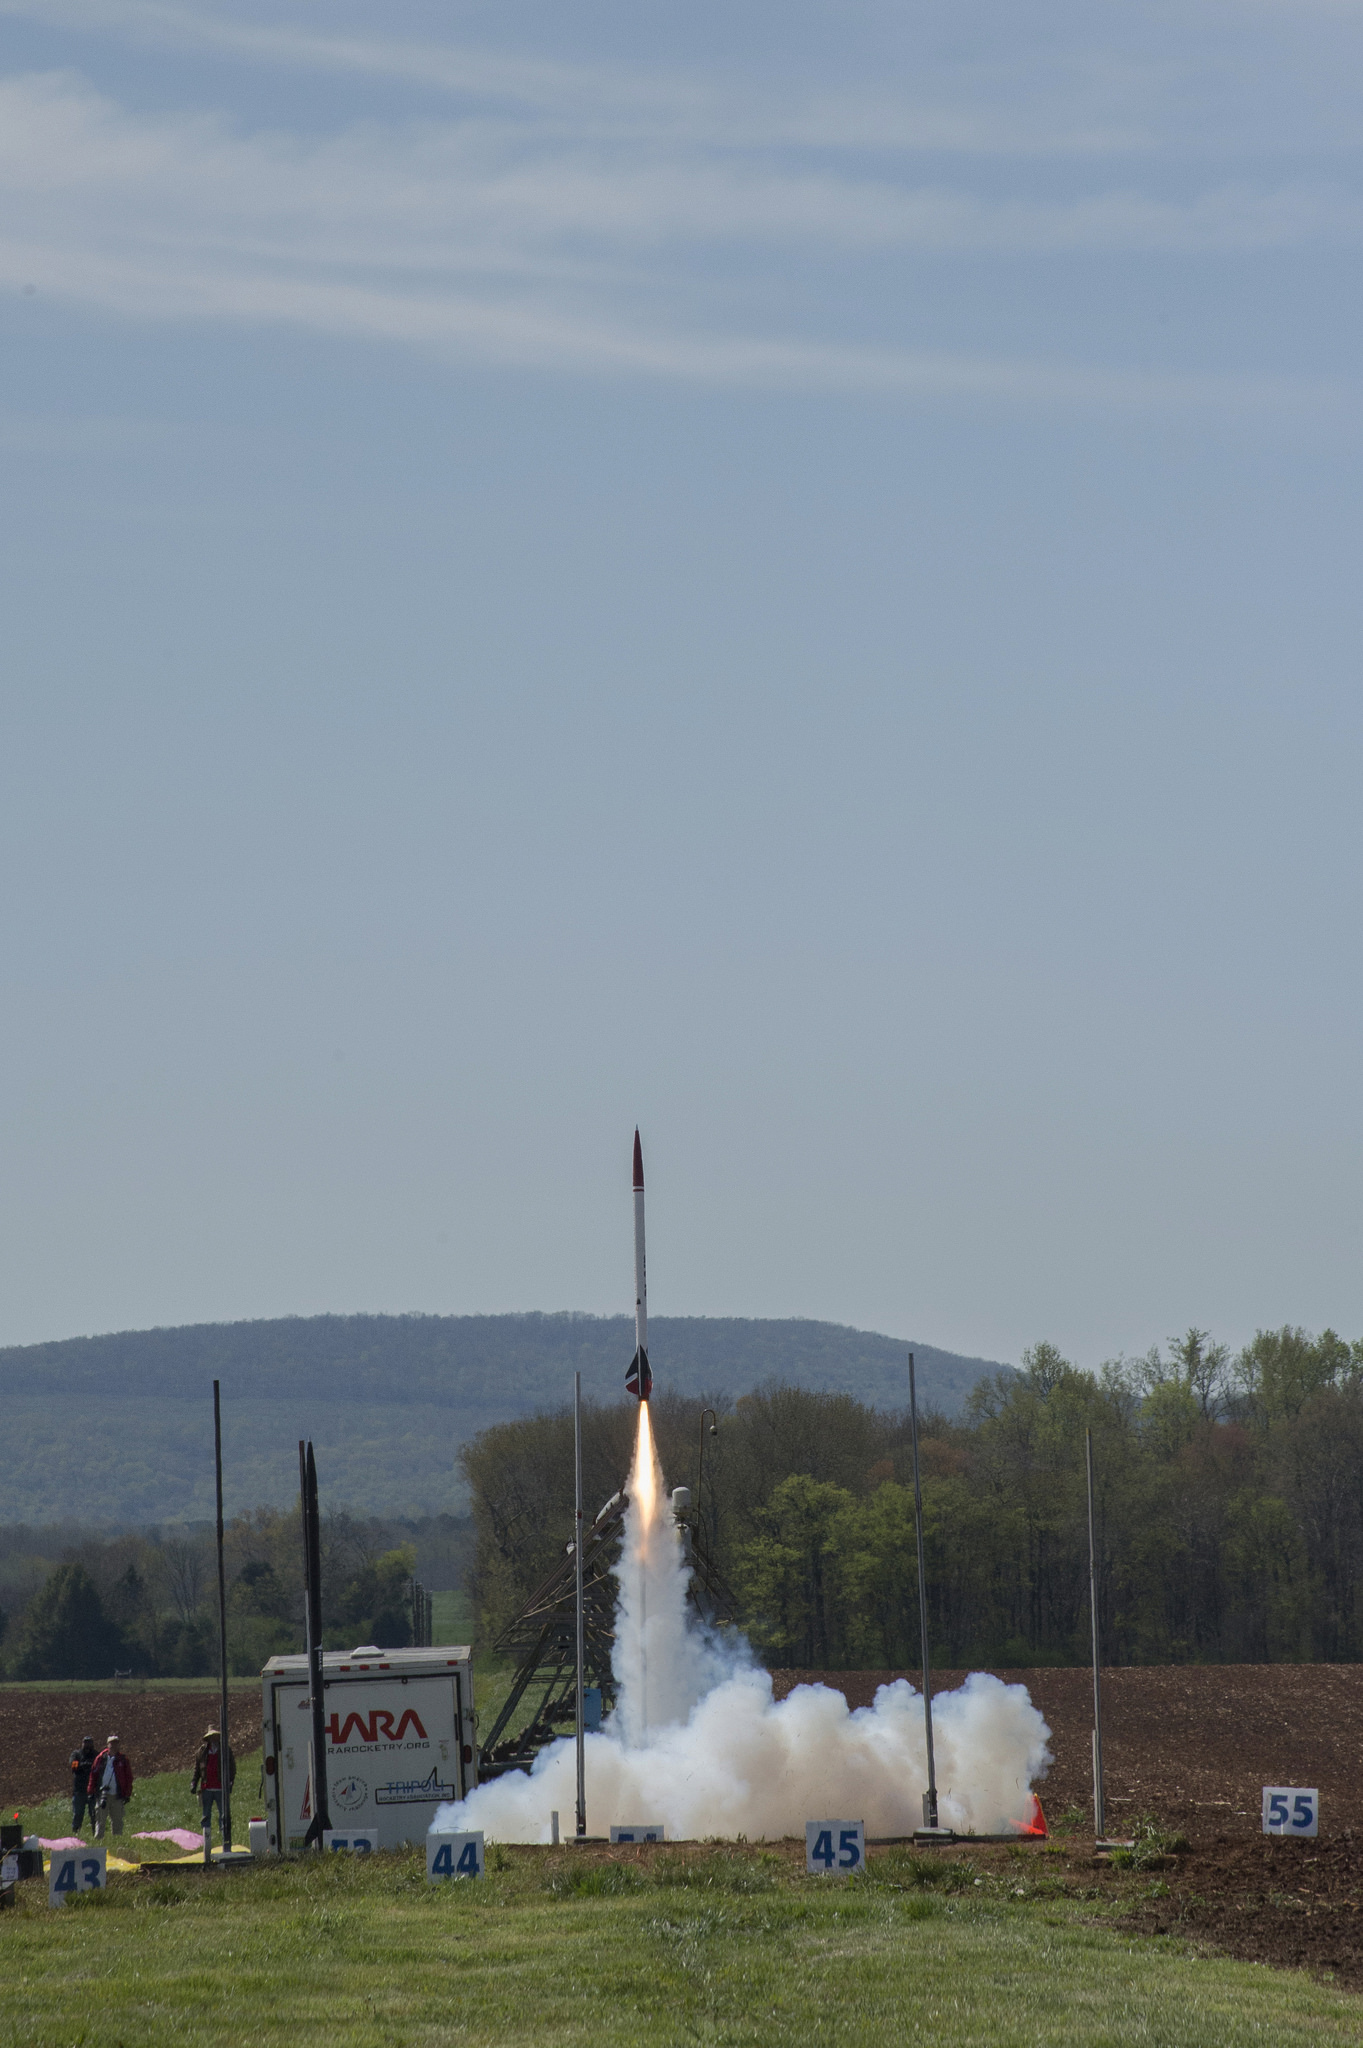 A high-powered amateur rocket takes off